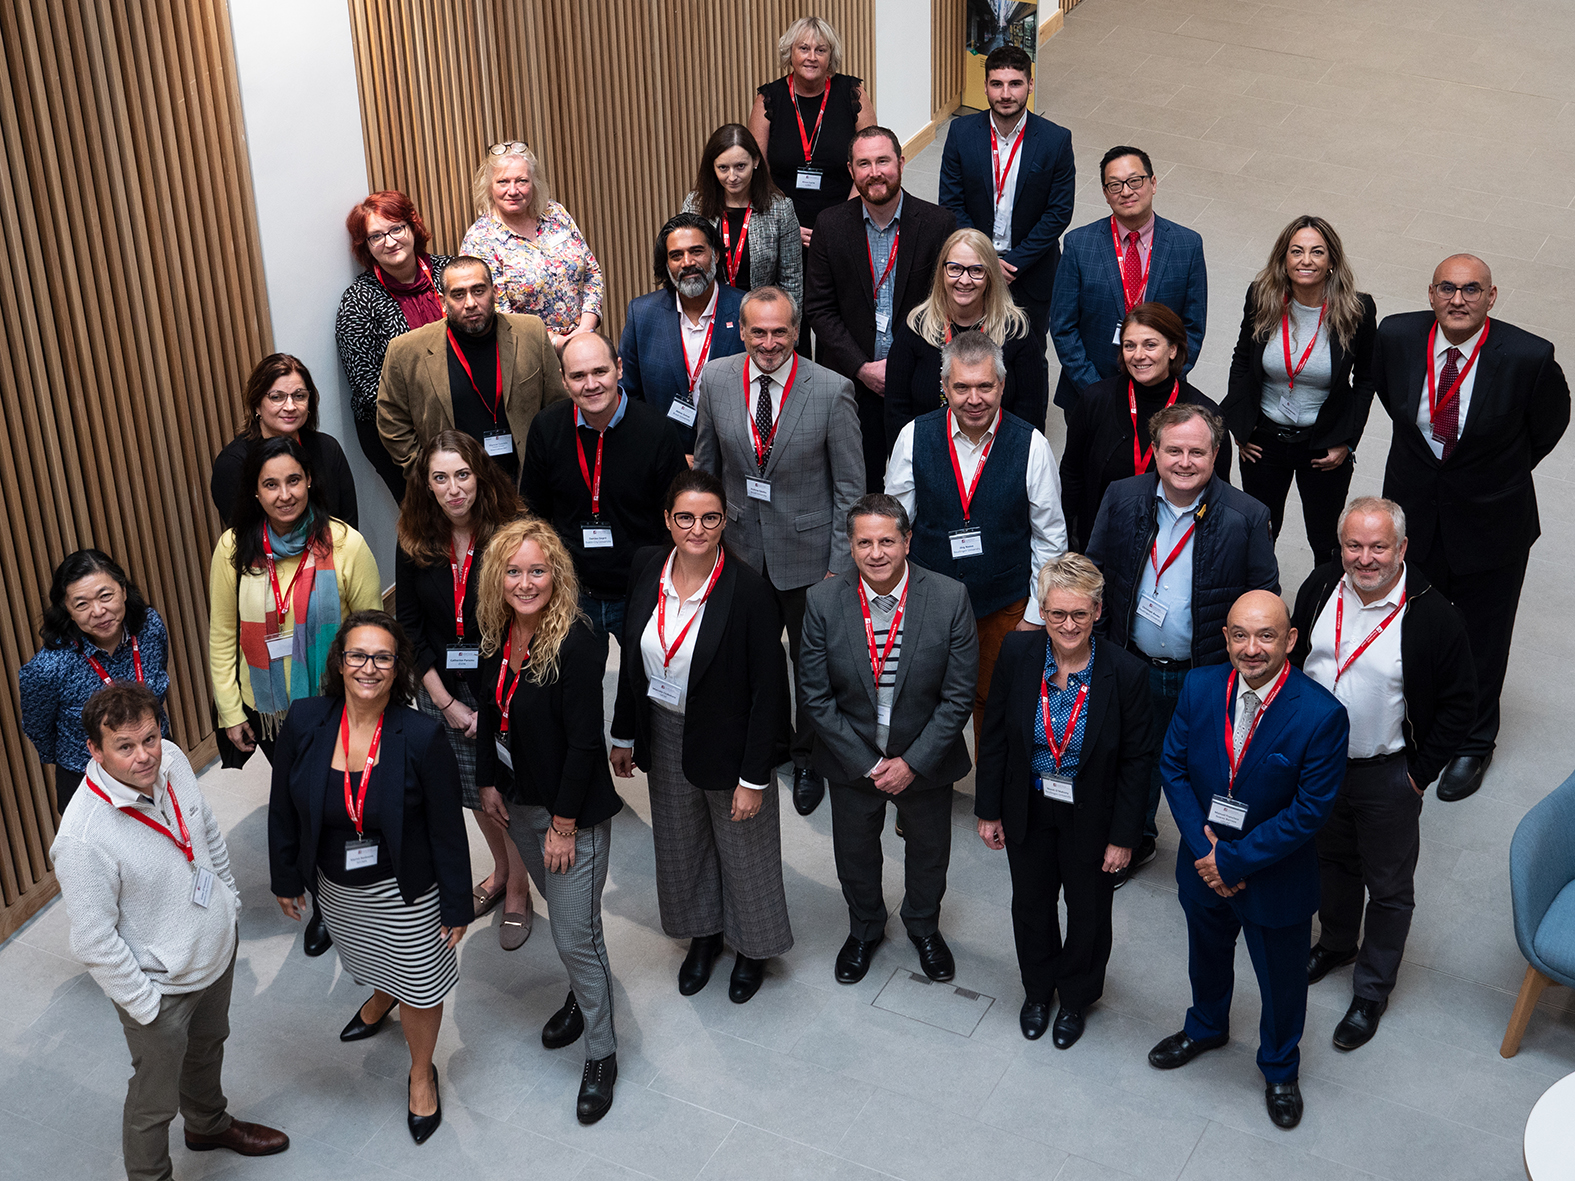 Members of the International Partnership of Business Schools looking up at the camera while stood together in a hall in Lancaster University Management School